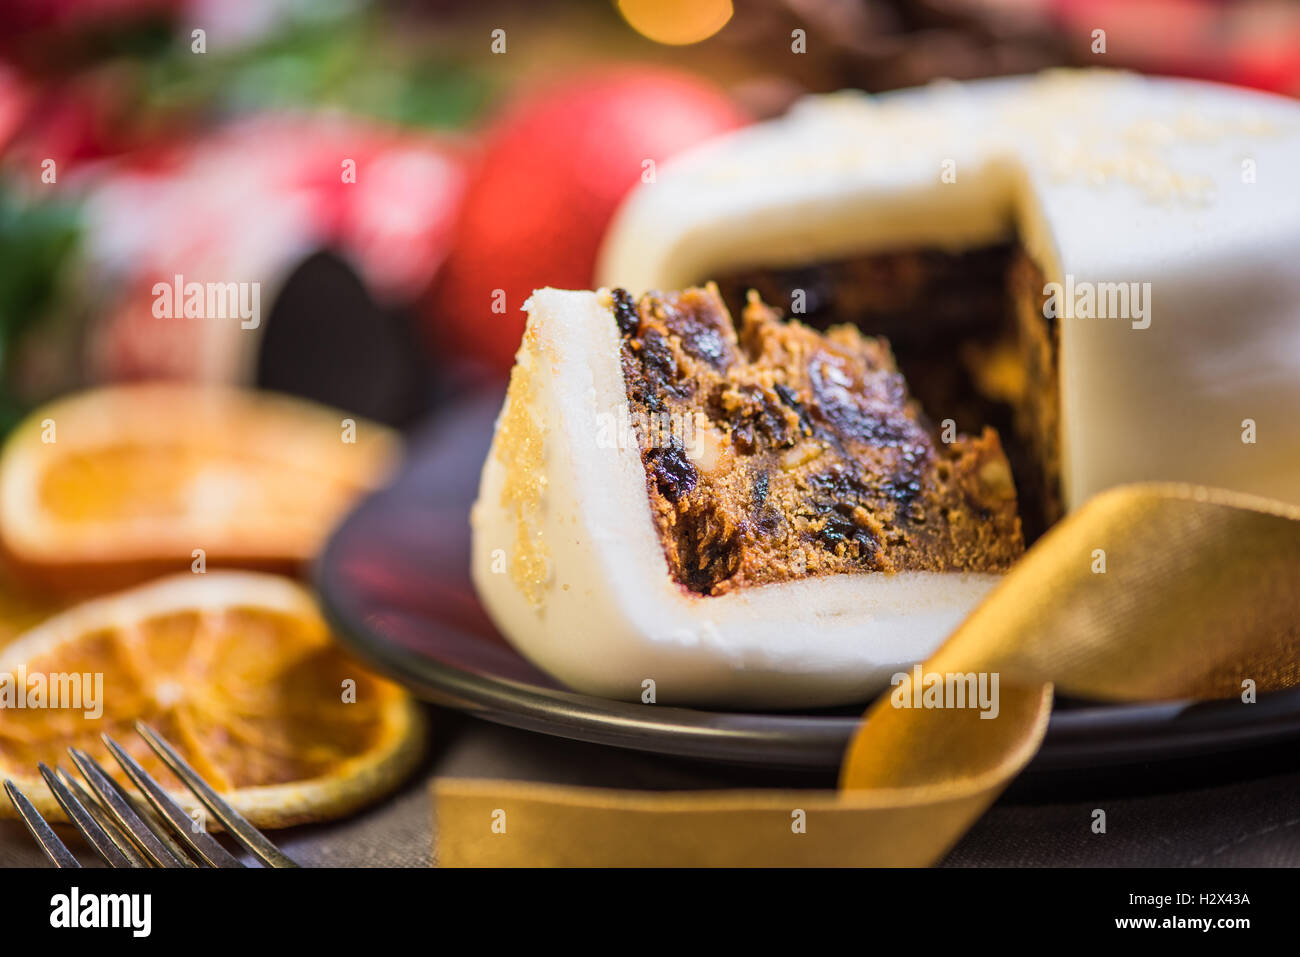 Slicing Christmas traditional festive fruit cake, Christmas ornaments and decorations Stock Photo